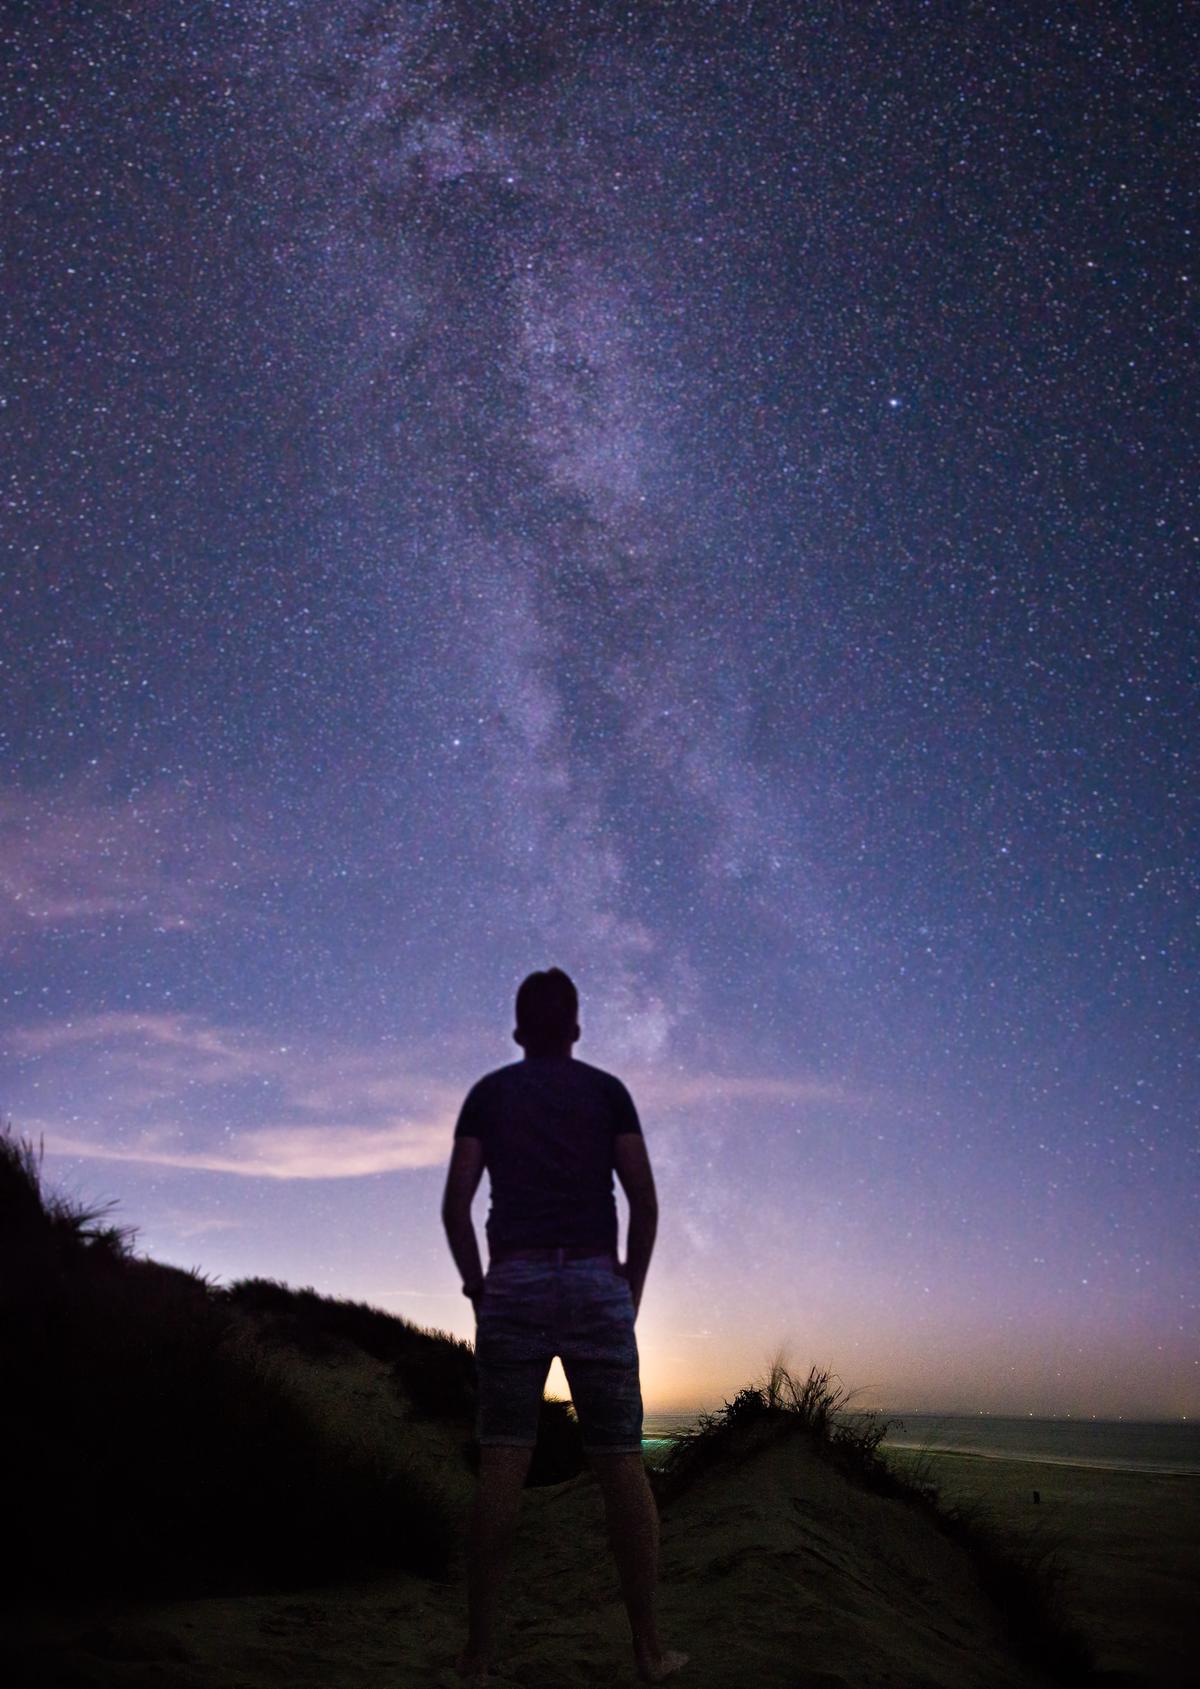 A person standing on a hill looking up at the night sky filled with stars.